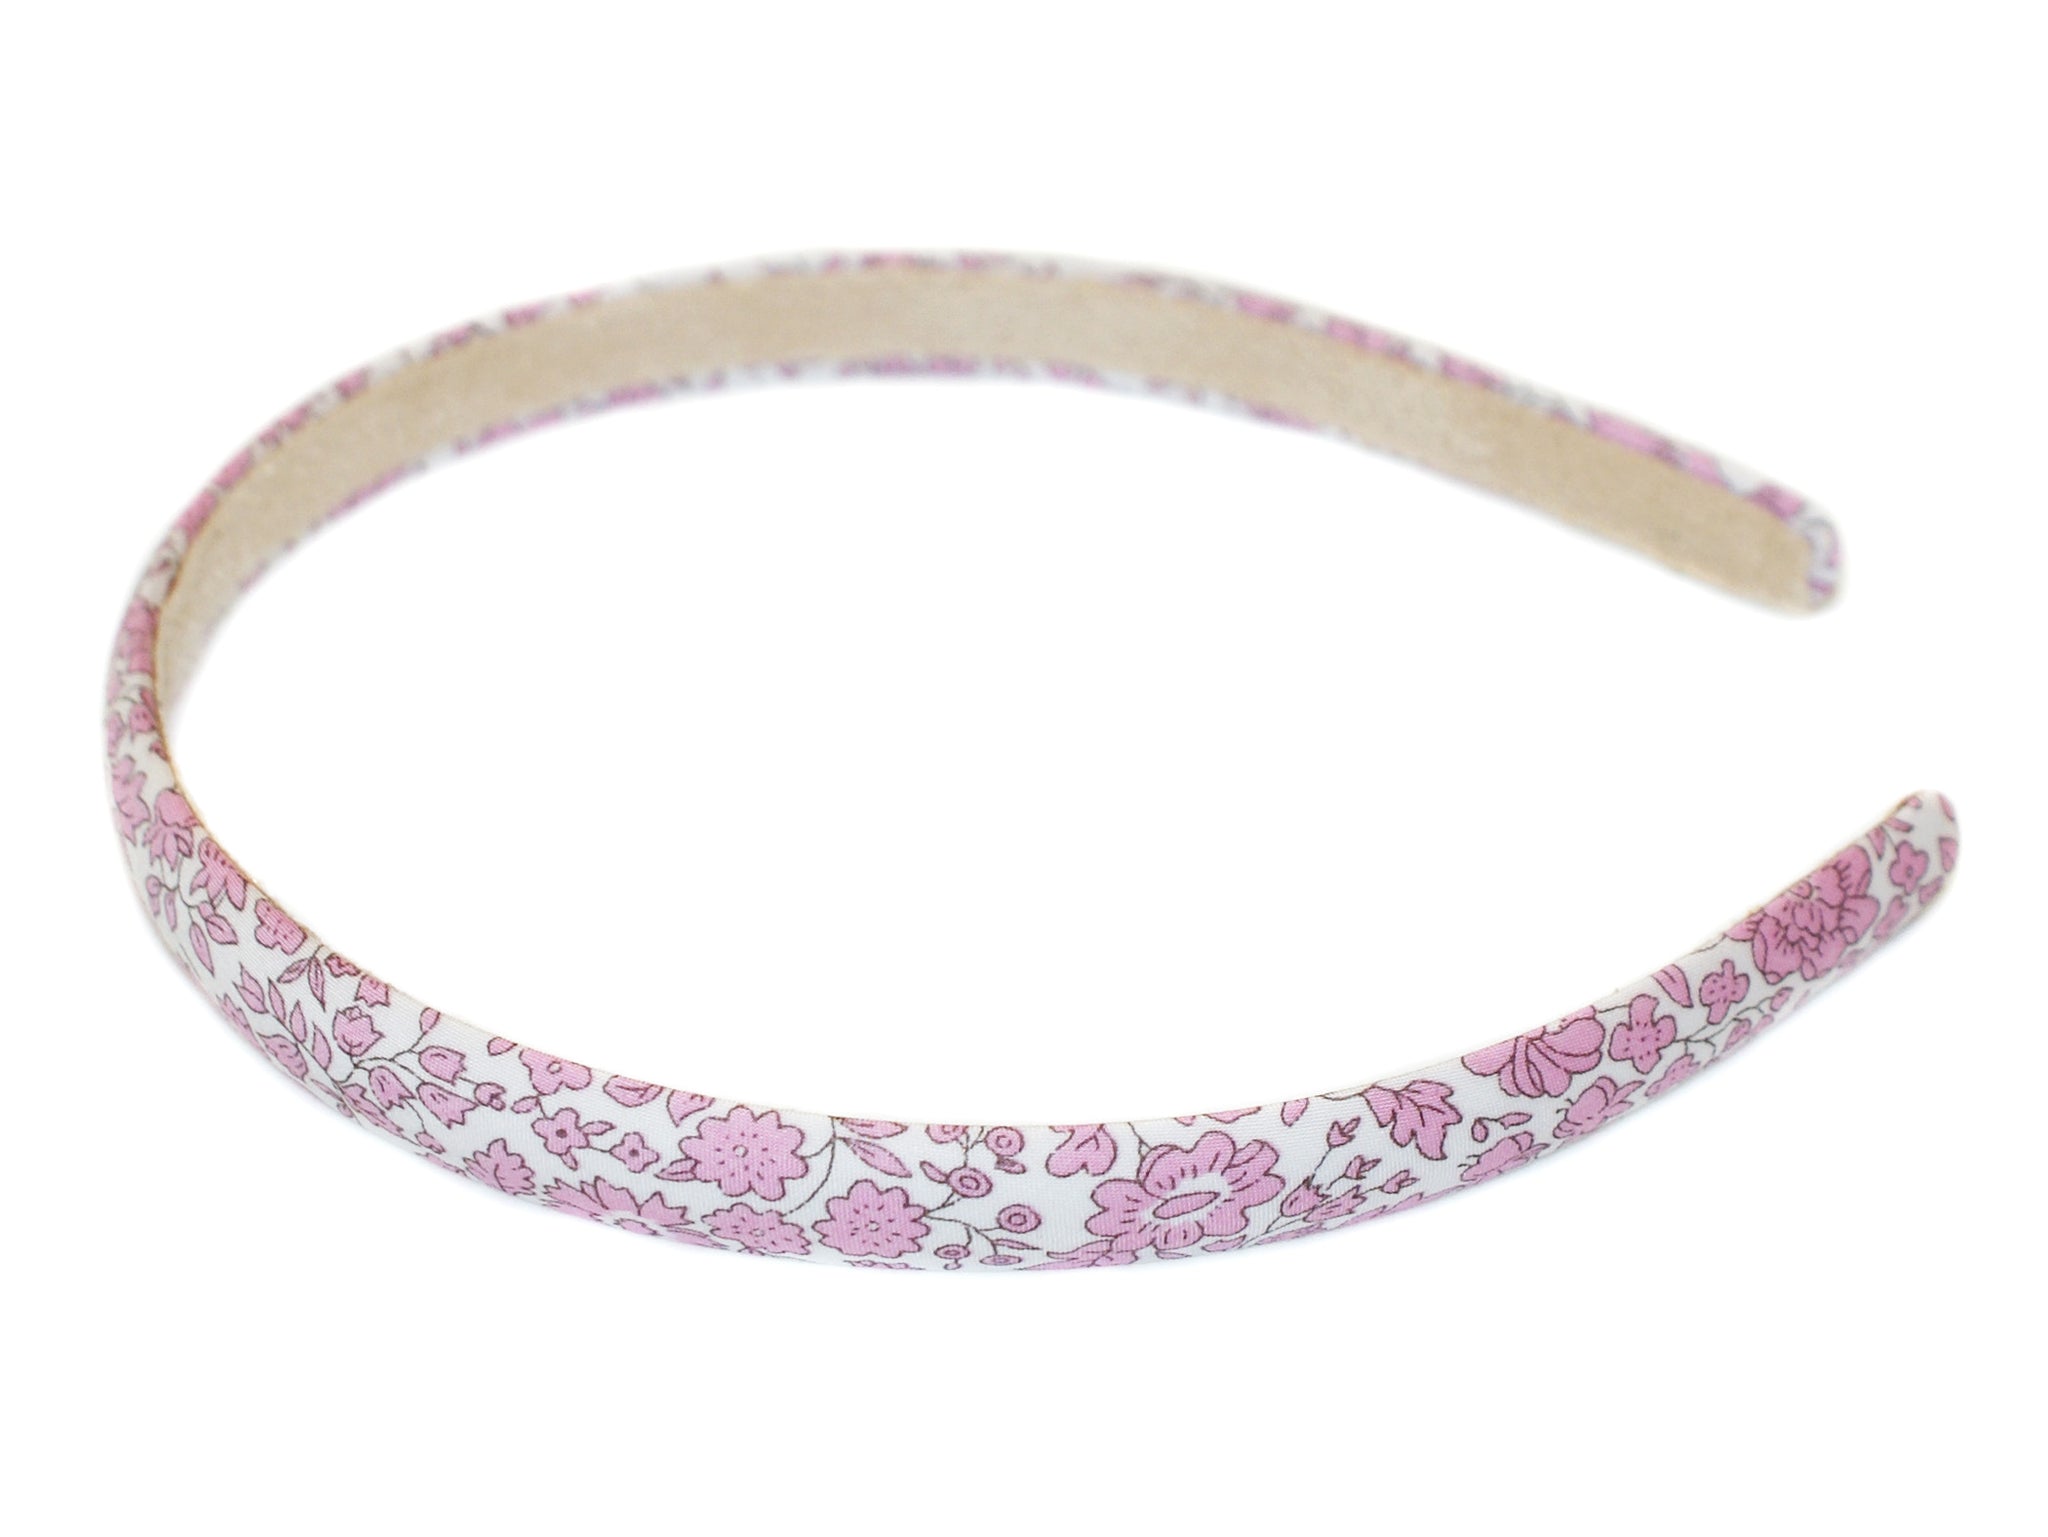 Liberty Danjo Coast Suede Lined Alice Band - Pink